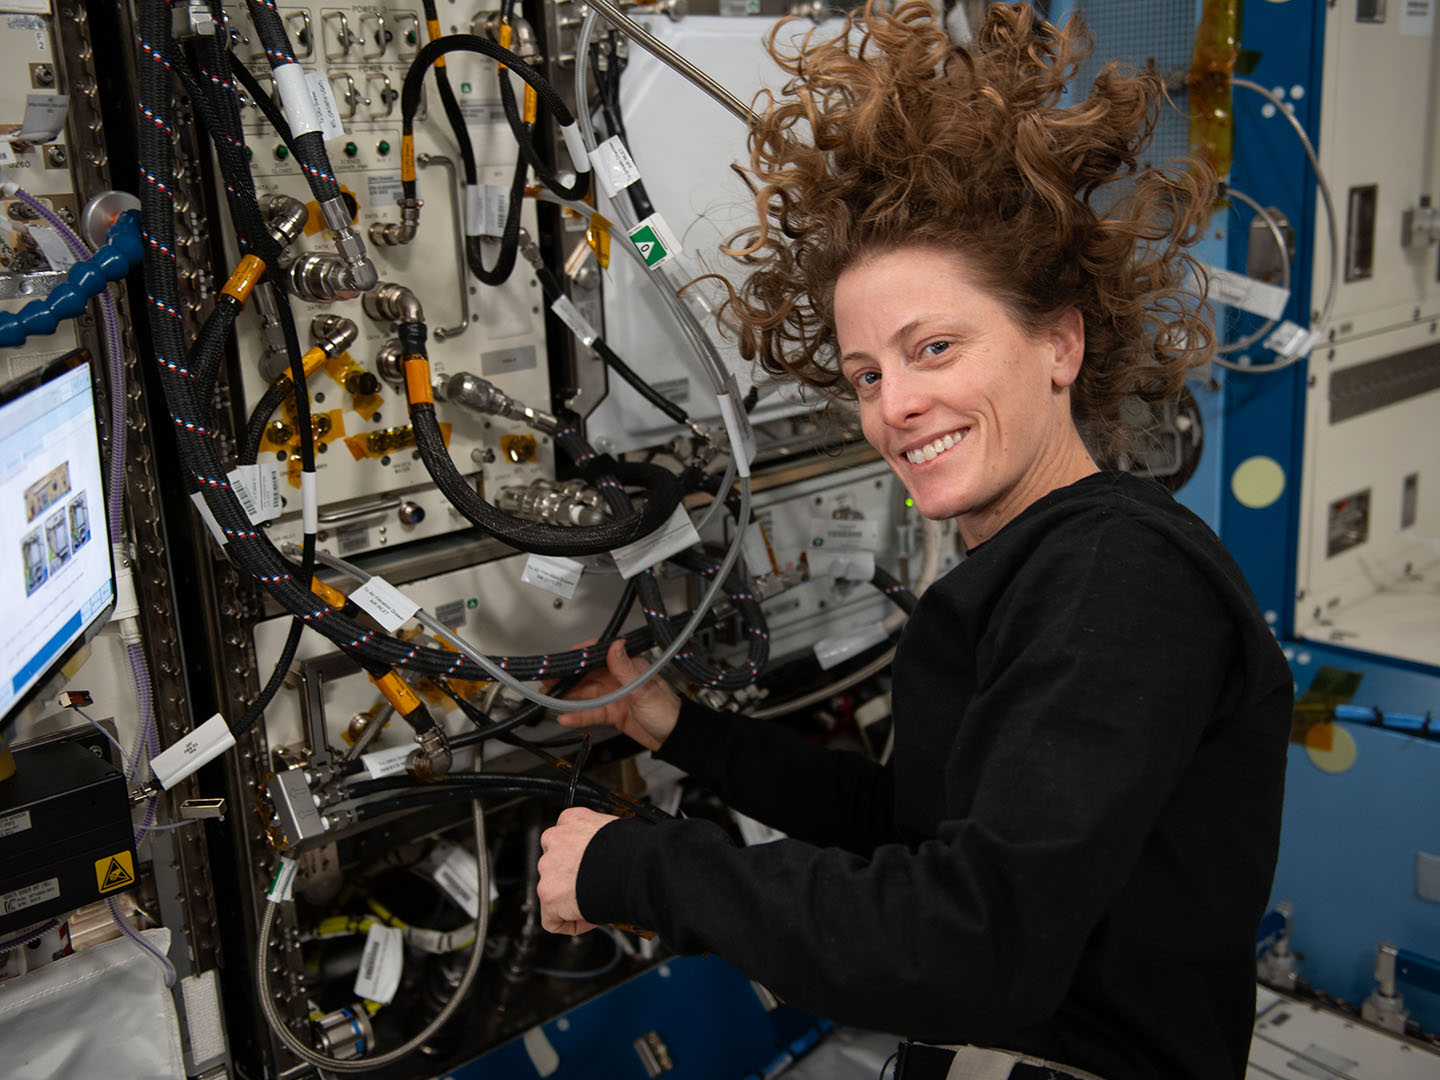 NASA astronaut and Expedition 70 Flight Engineer Loral O'Hara replaces hardware inside the Plant Habitat facility to prep for future experiments investigating genetic responses and immune system function of tomatoes in microgravity. Credit: NASA